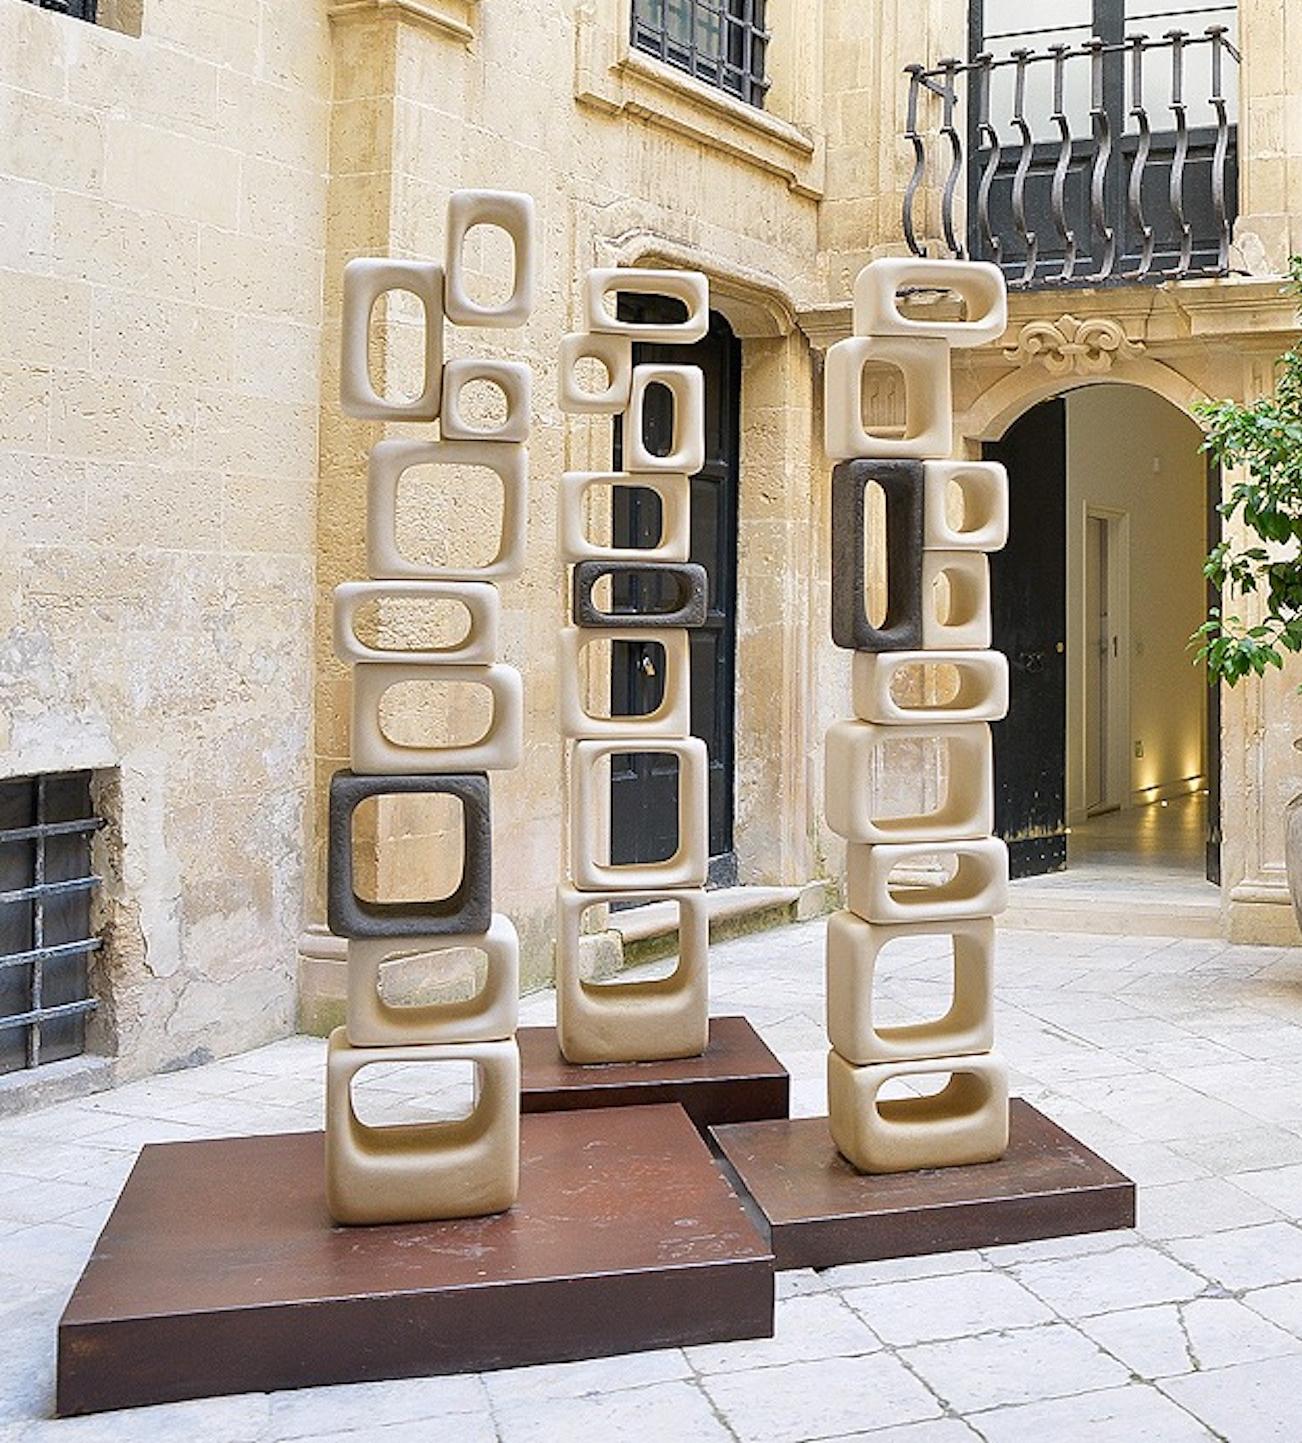 21st Century abstract sculpture NIURA by Renzo Buttazzo from Italy.

Sculpture in Lecce Stone
Delivered with a certificate of authenticity (dated & signed)
The illustration photo shows 3 NIURA sculptures.
They are also sold individually.
Contact us